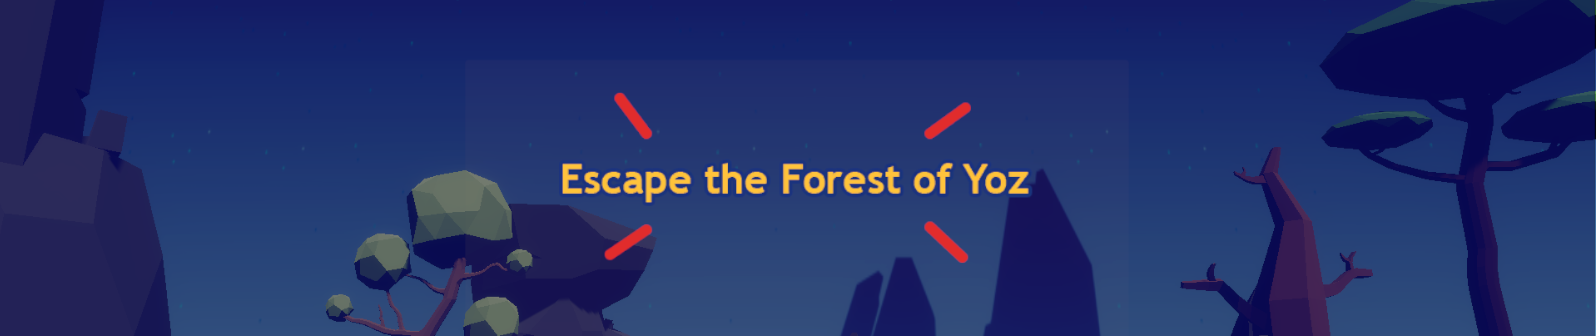 Escape the Forest of Yoz